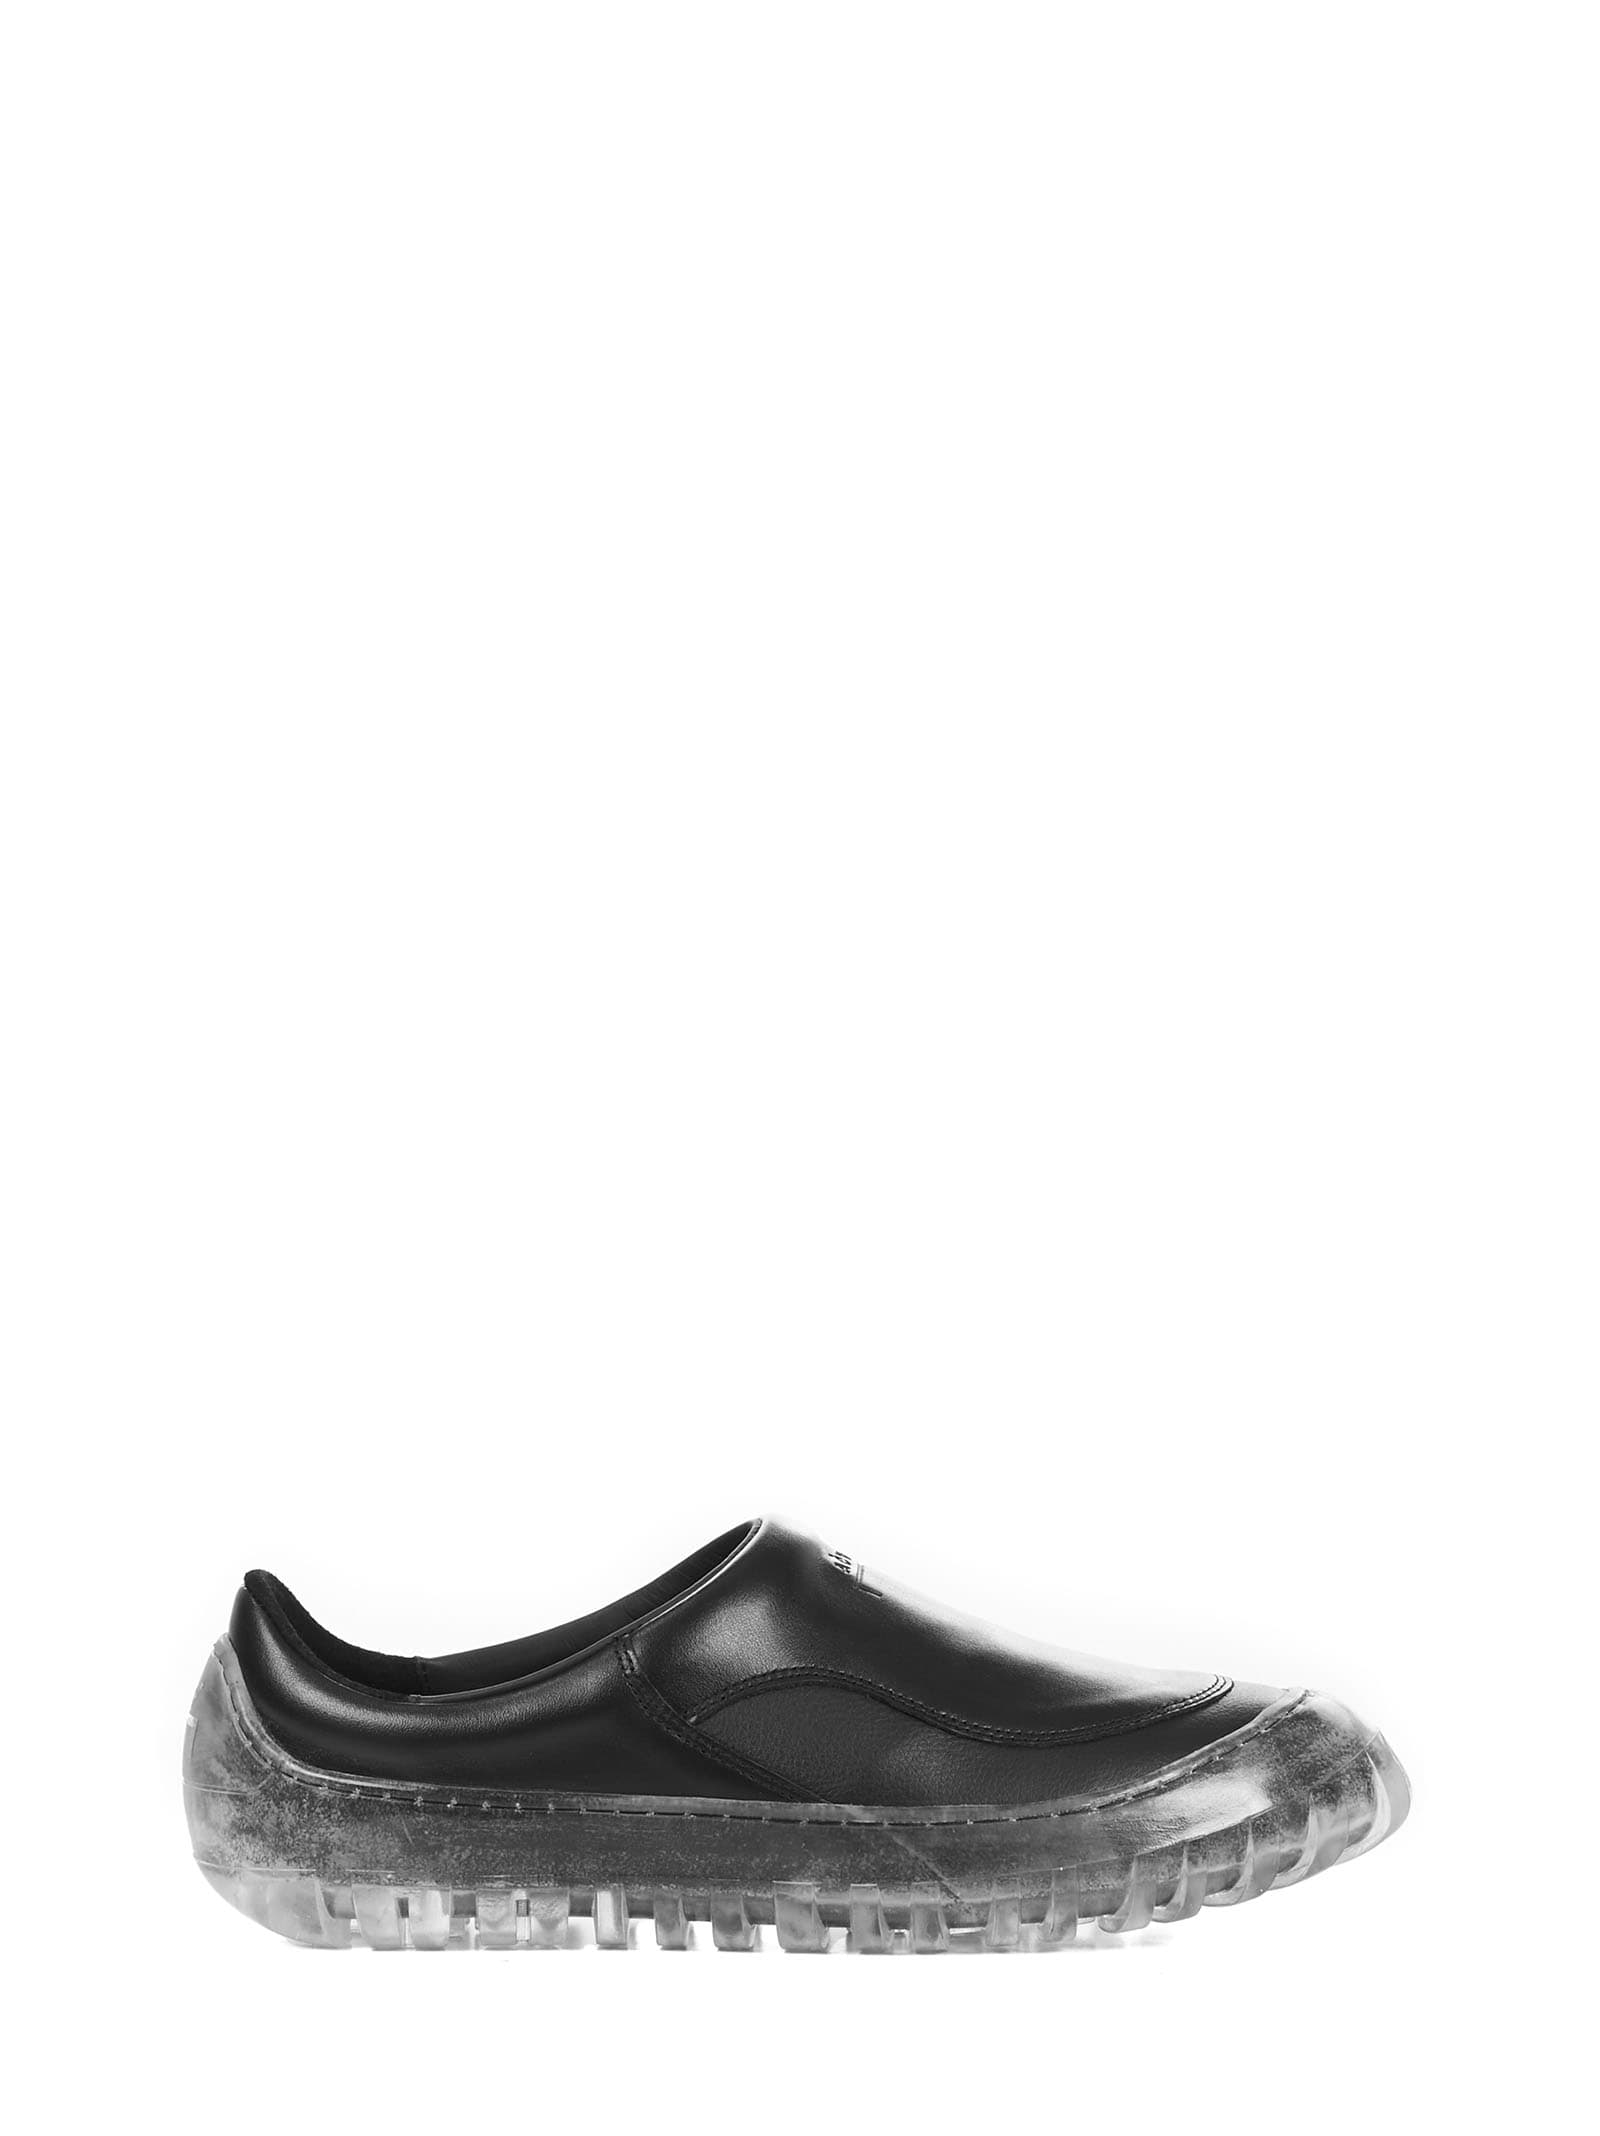 A-COLD-WALL A Cold Wall Strand 180 Loafers